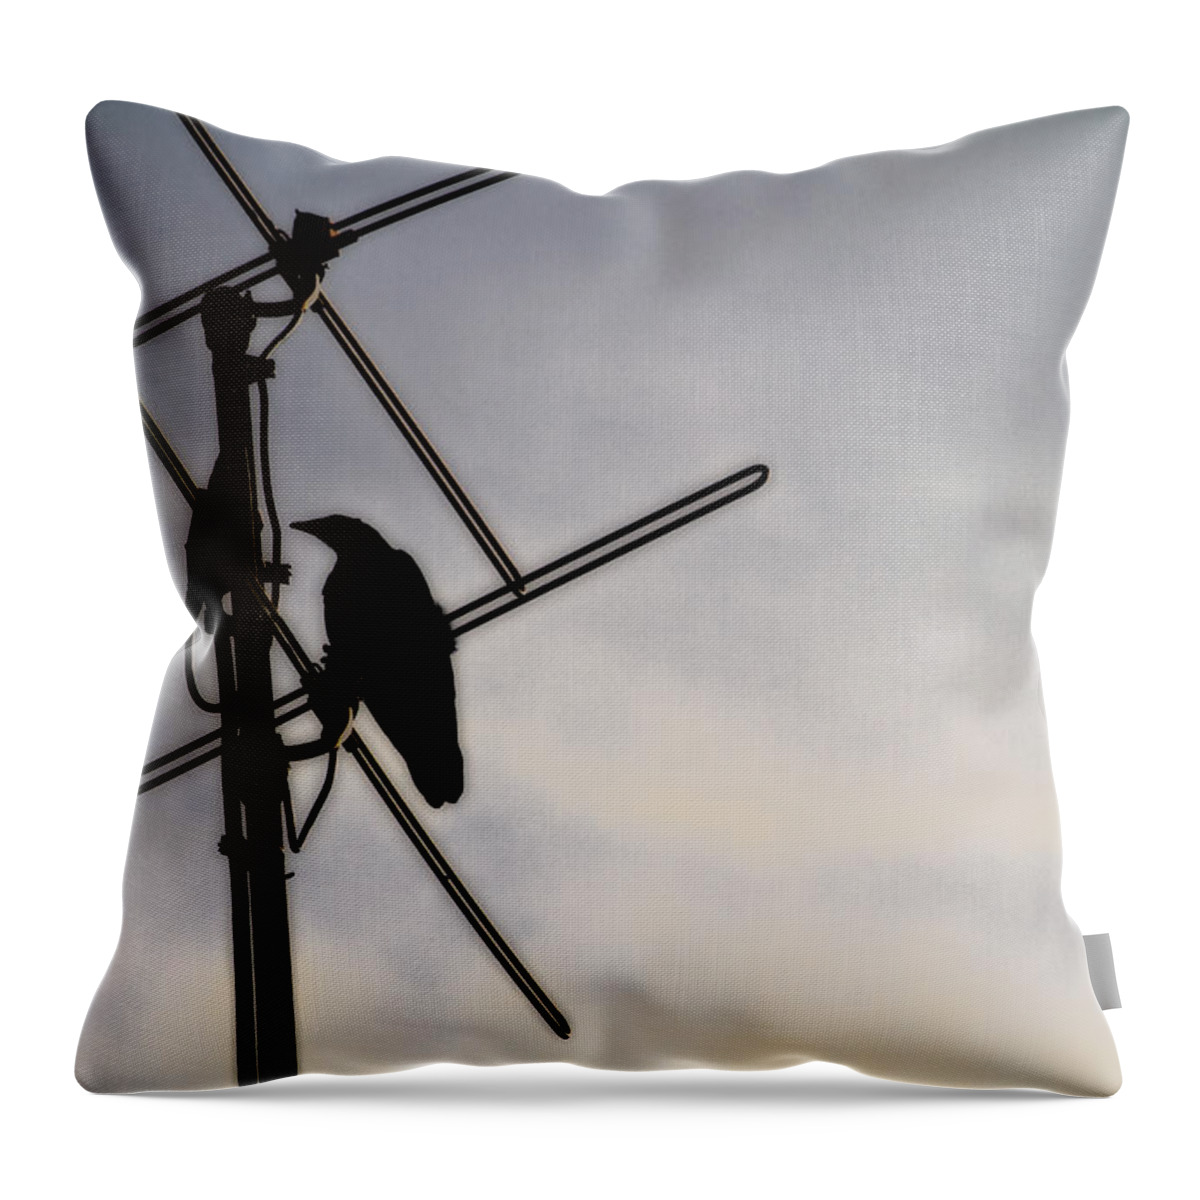 Raven Throw Pillow featuring the photograph Ravens Perch by Karol Livote